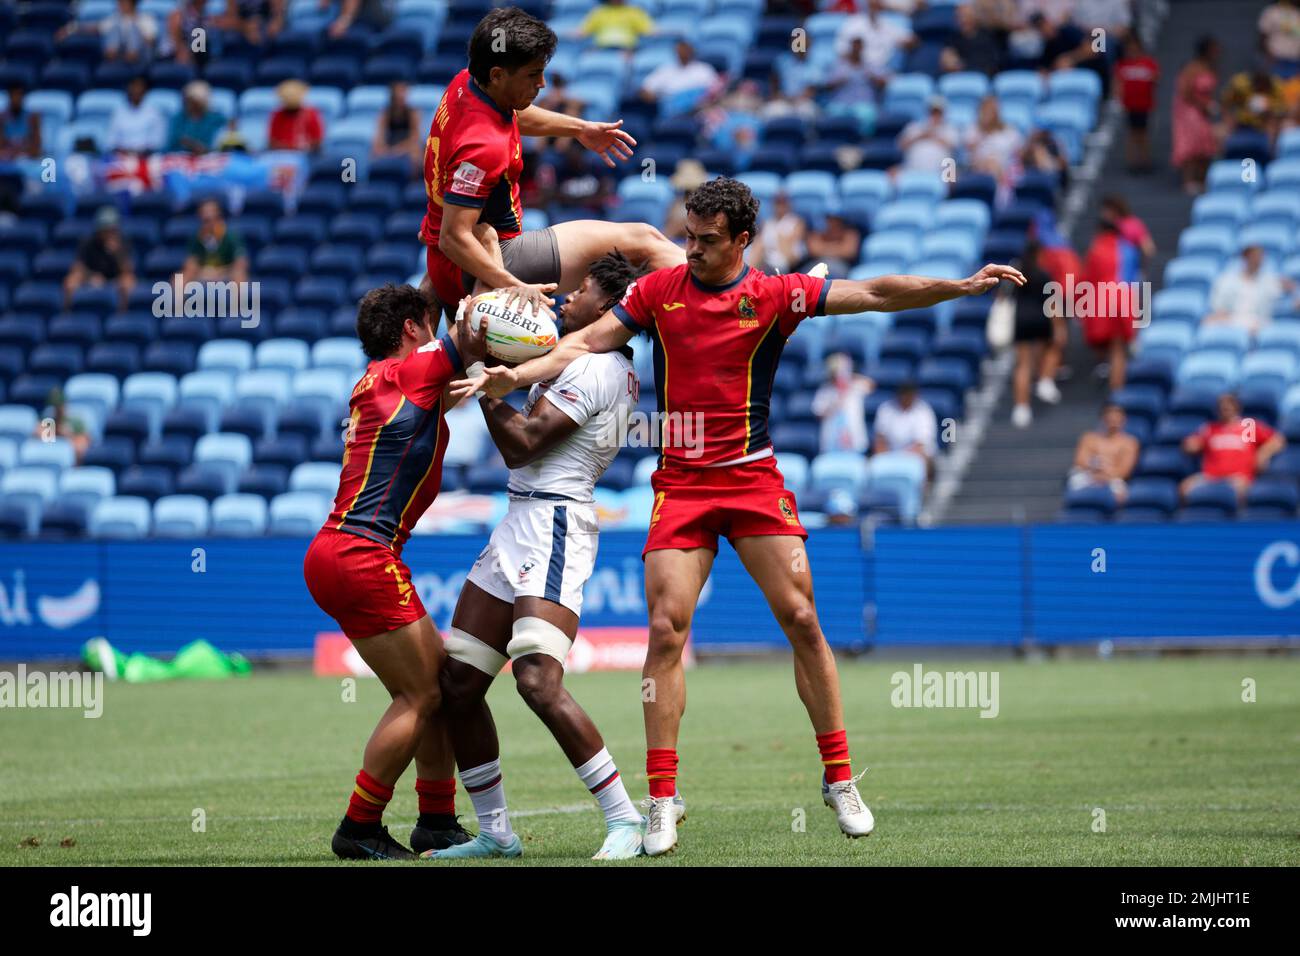 Sydney, Australia. 27th Jan 2023. Aaron Cummings of USA catches the loose ball from the line out during the 2023 Sydney Sevens match between USA and Spain at Allianz Stadium on January 27, 2023 in Sydney, Australia Credit: IOIO IMAGES/Alamy Live News Stock Photo